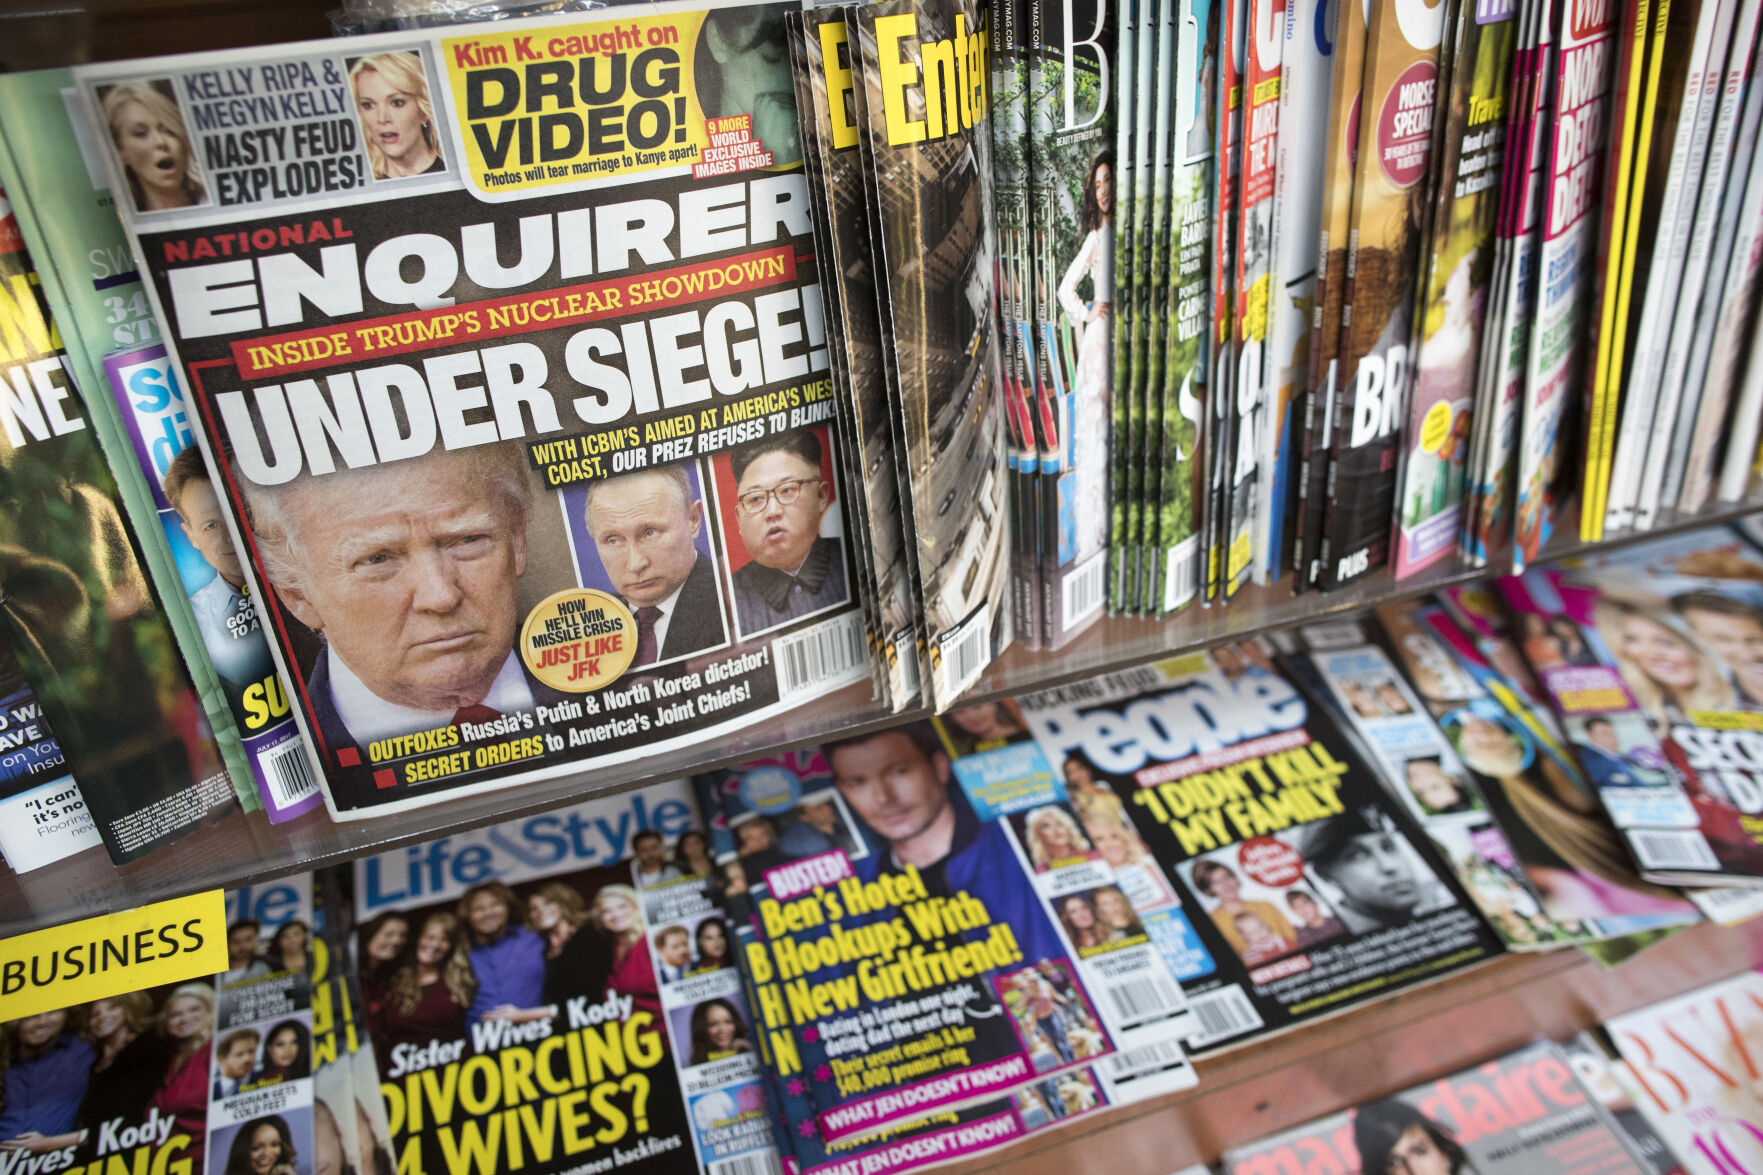 <p>FILE - In this July 12, 2017 file photo, an issue of the National Enquirer featuring President Donald Trump on its cover is displayed on a newsstand in a store in New York. VVIP Ventures is buying the U.S. and U.K editions of the National Enquirer, the tabloid that engaged in “catch-and-kill” practices to bury stories about Donald Trump during his presidential campaign. Financial terms were not disclosed. (AP Photo/Mary Altaffer, File)</p>   PHOTO CREDIT: Mary Altaffer 